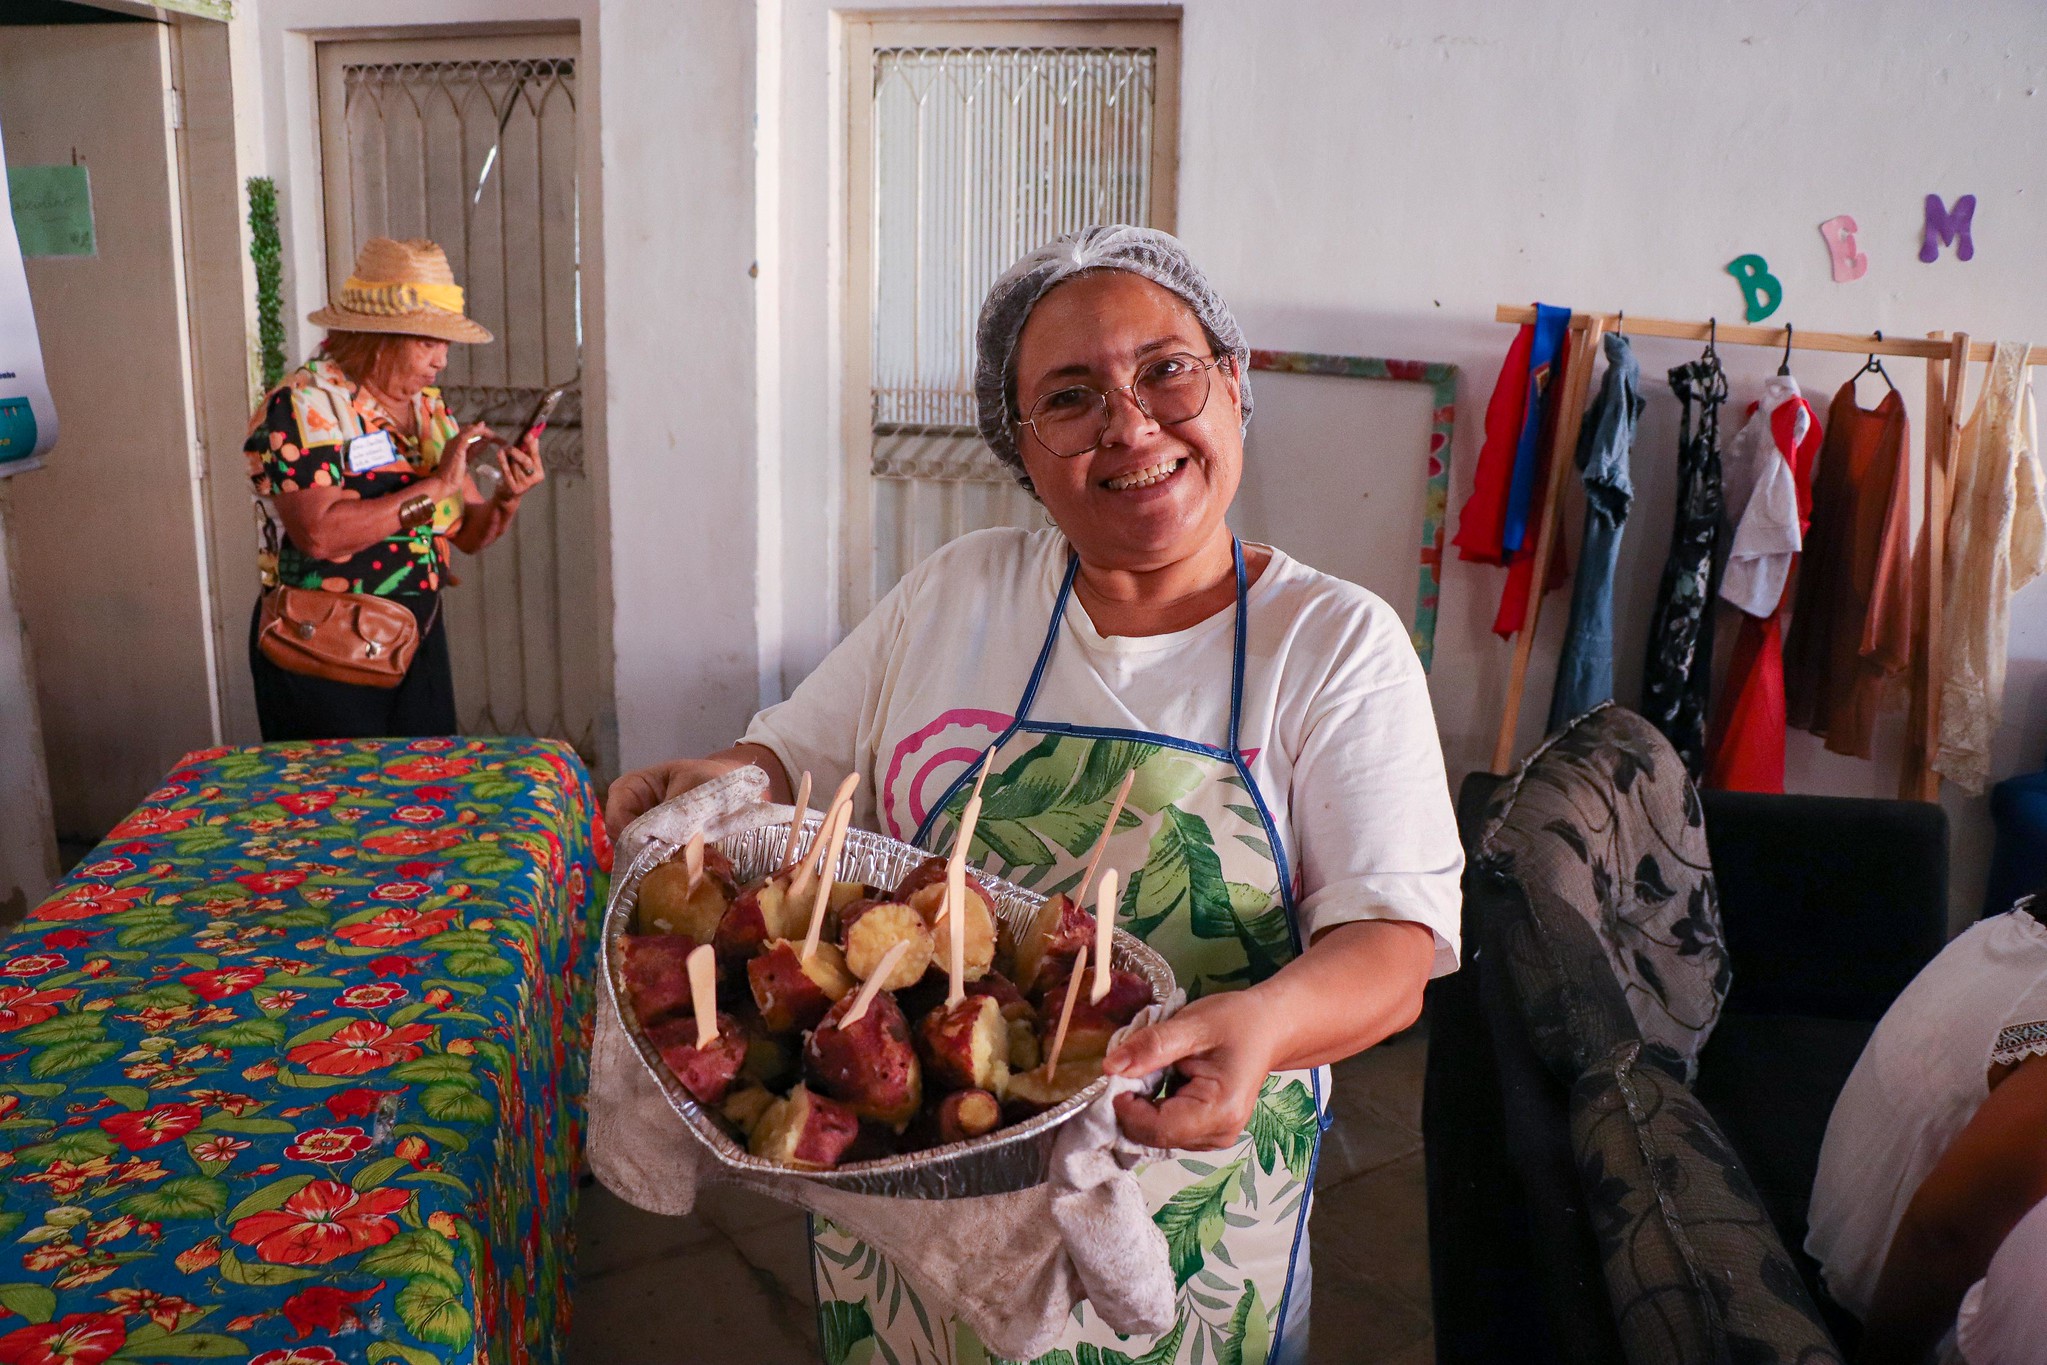 Anna Paula Sales, community organizer in Engenho, Itaguaí, and founder of the Itaguaí Women's Association—Warriors and Social Articulators (A.M.I.G.A.S.) shows off sweet potatoes being served in the Itaguaí Solidarity Kitchen. Photo: Alexandre Cerqueira